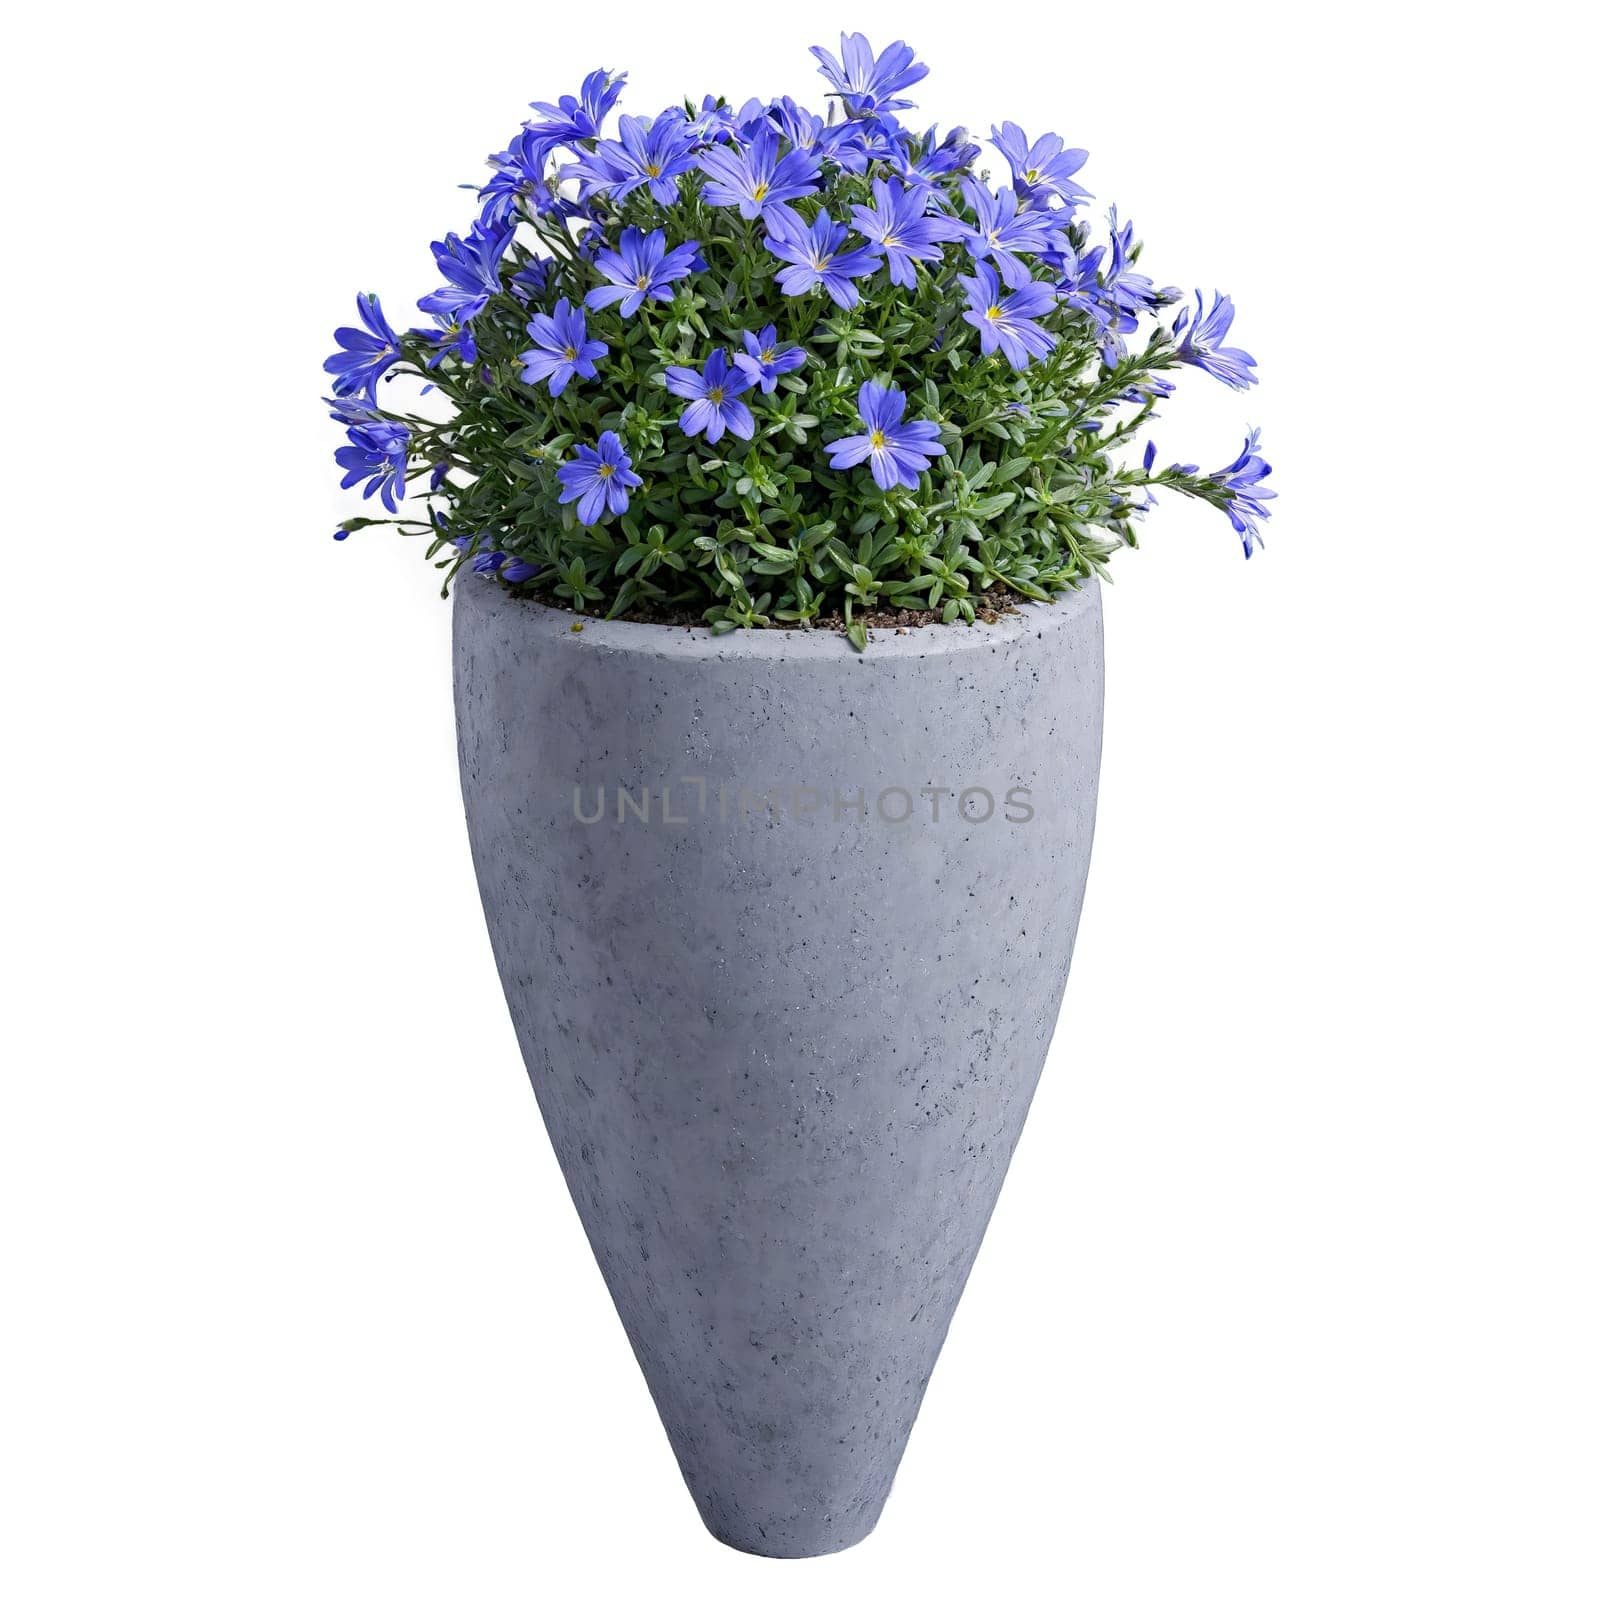 Scaevola cascading blue fan shaped flowers in a gray concrete planter stems trailing over the by panophotograph